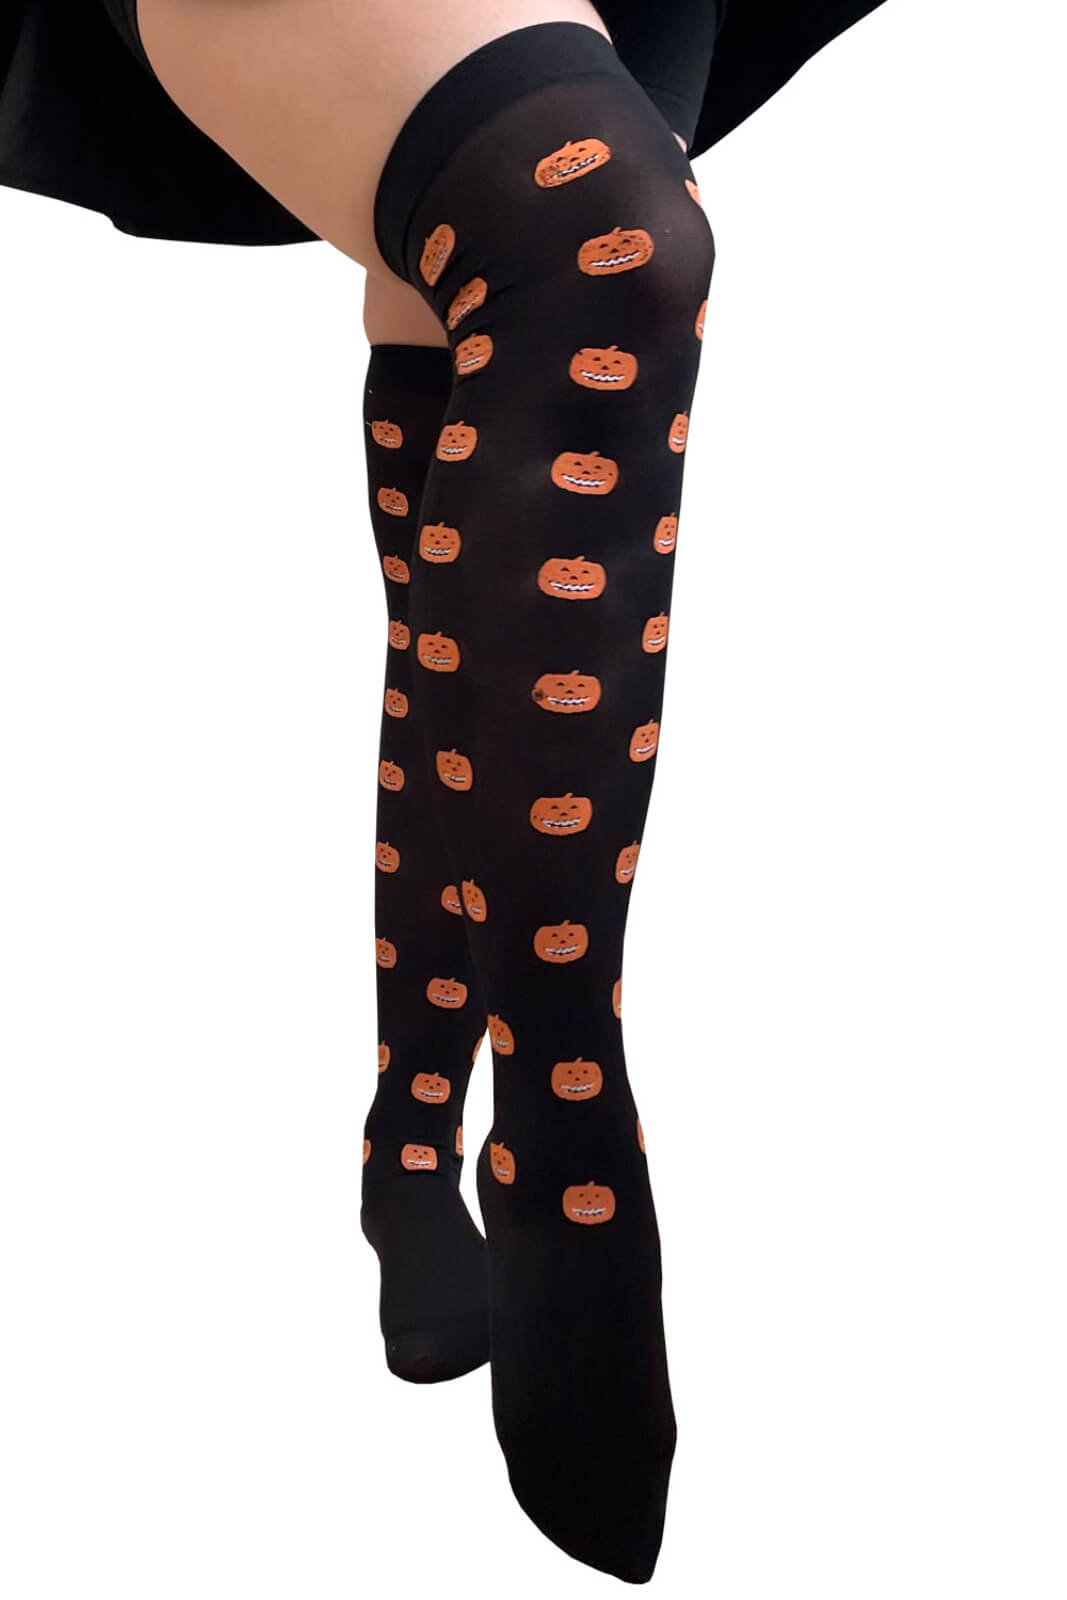 Banned Pumpkin Spice Over The Knee Socks Halloween Stockings, Black, One-Size